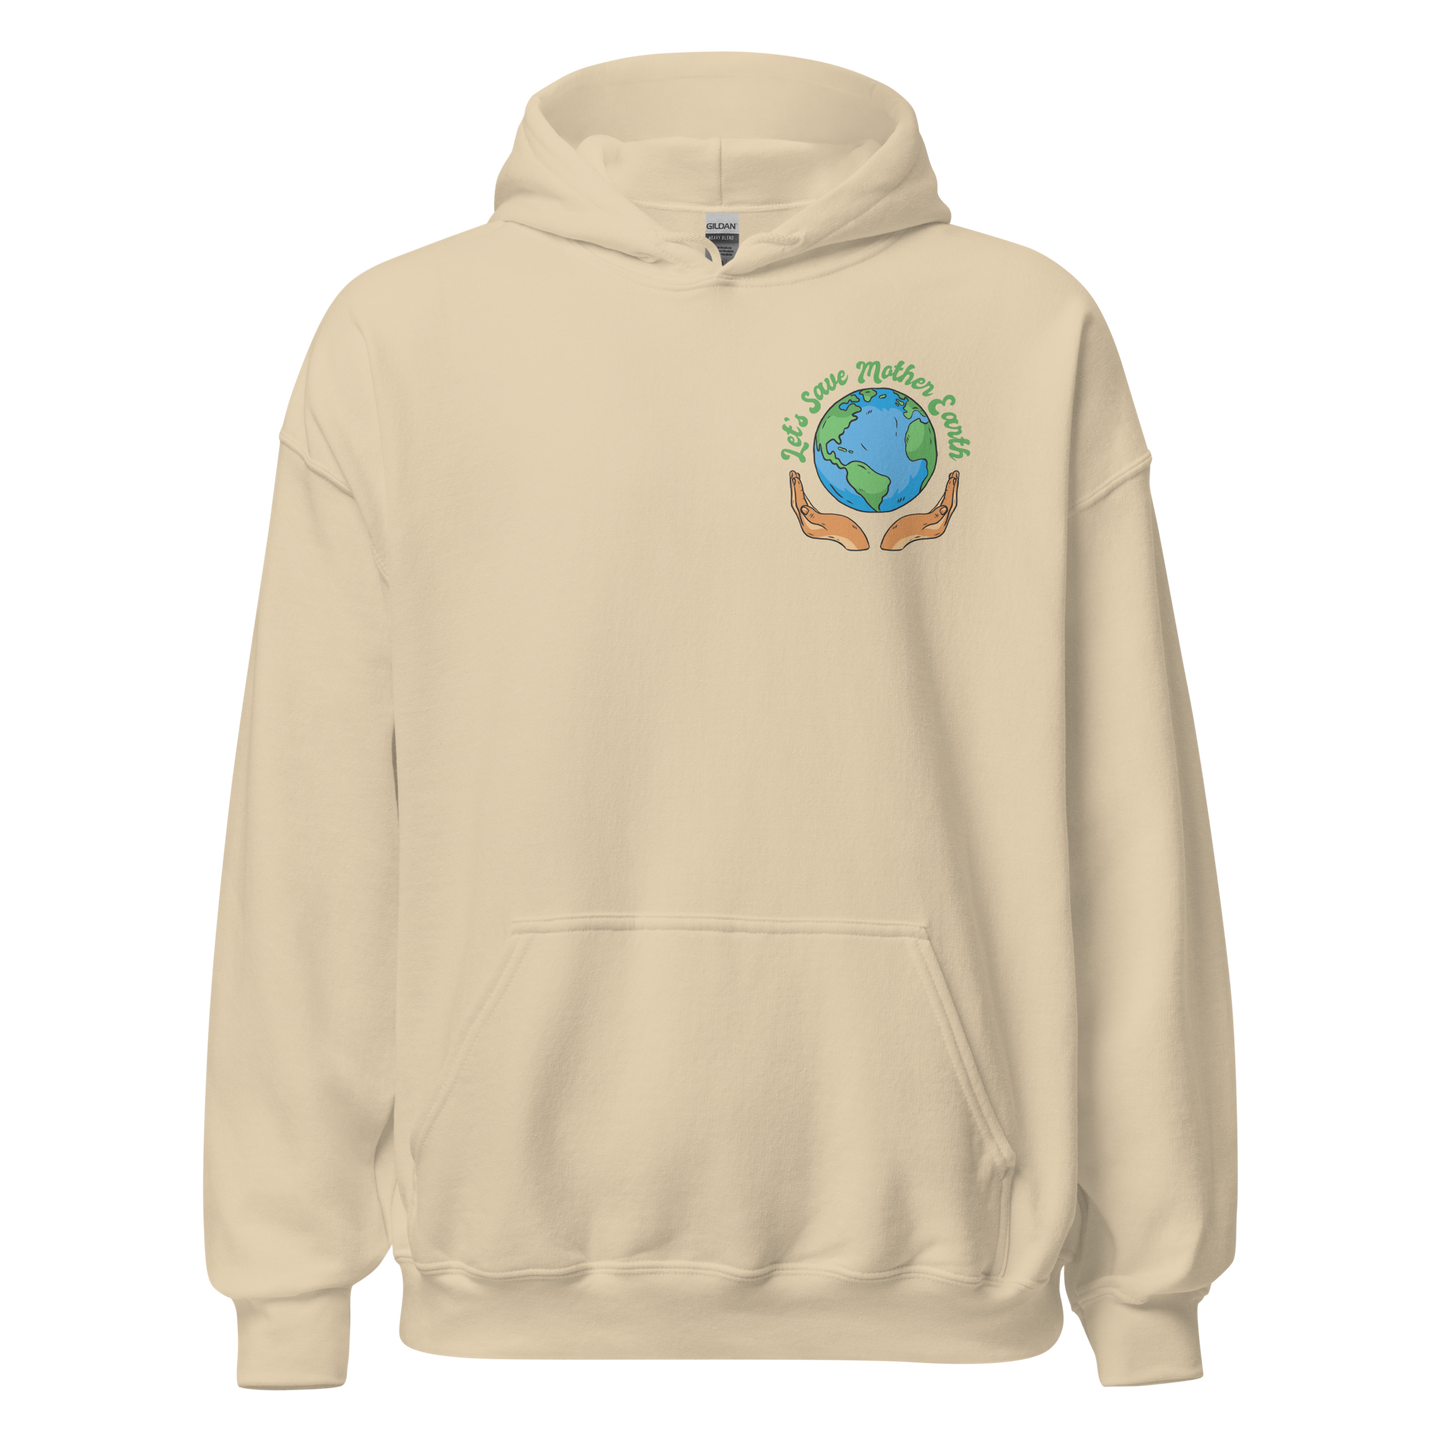 Hands holding planet earth | Unisex Hoodie - F&B